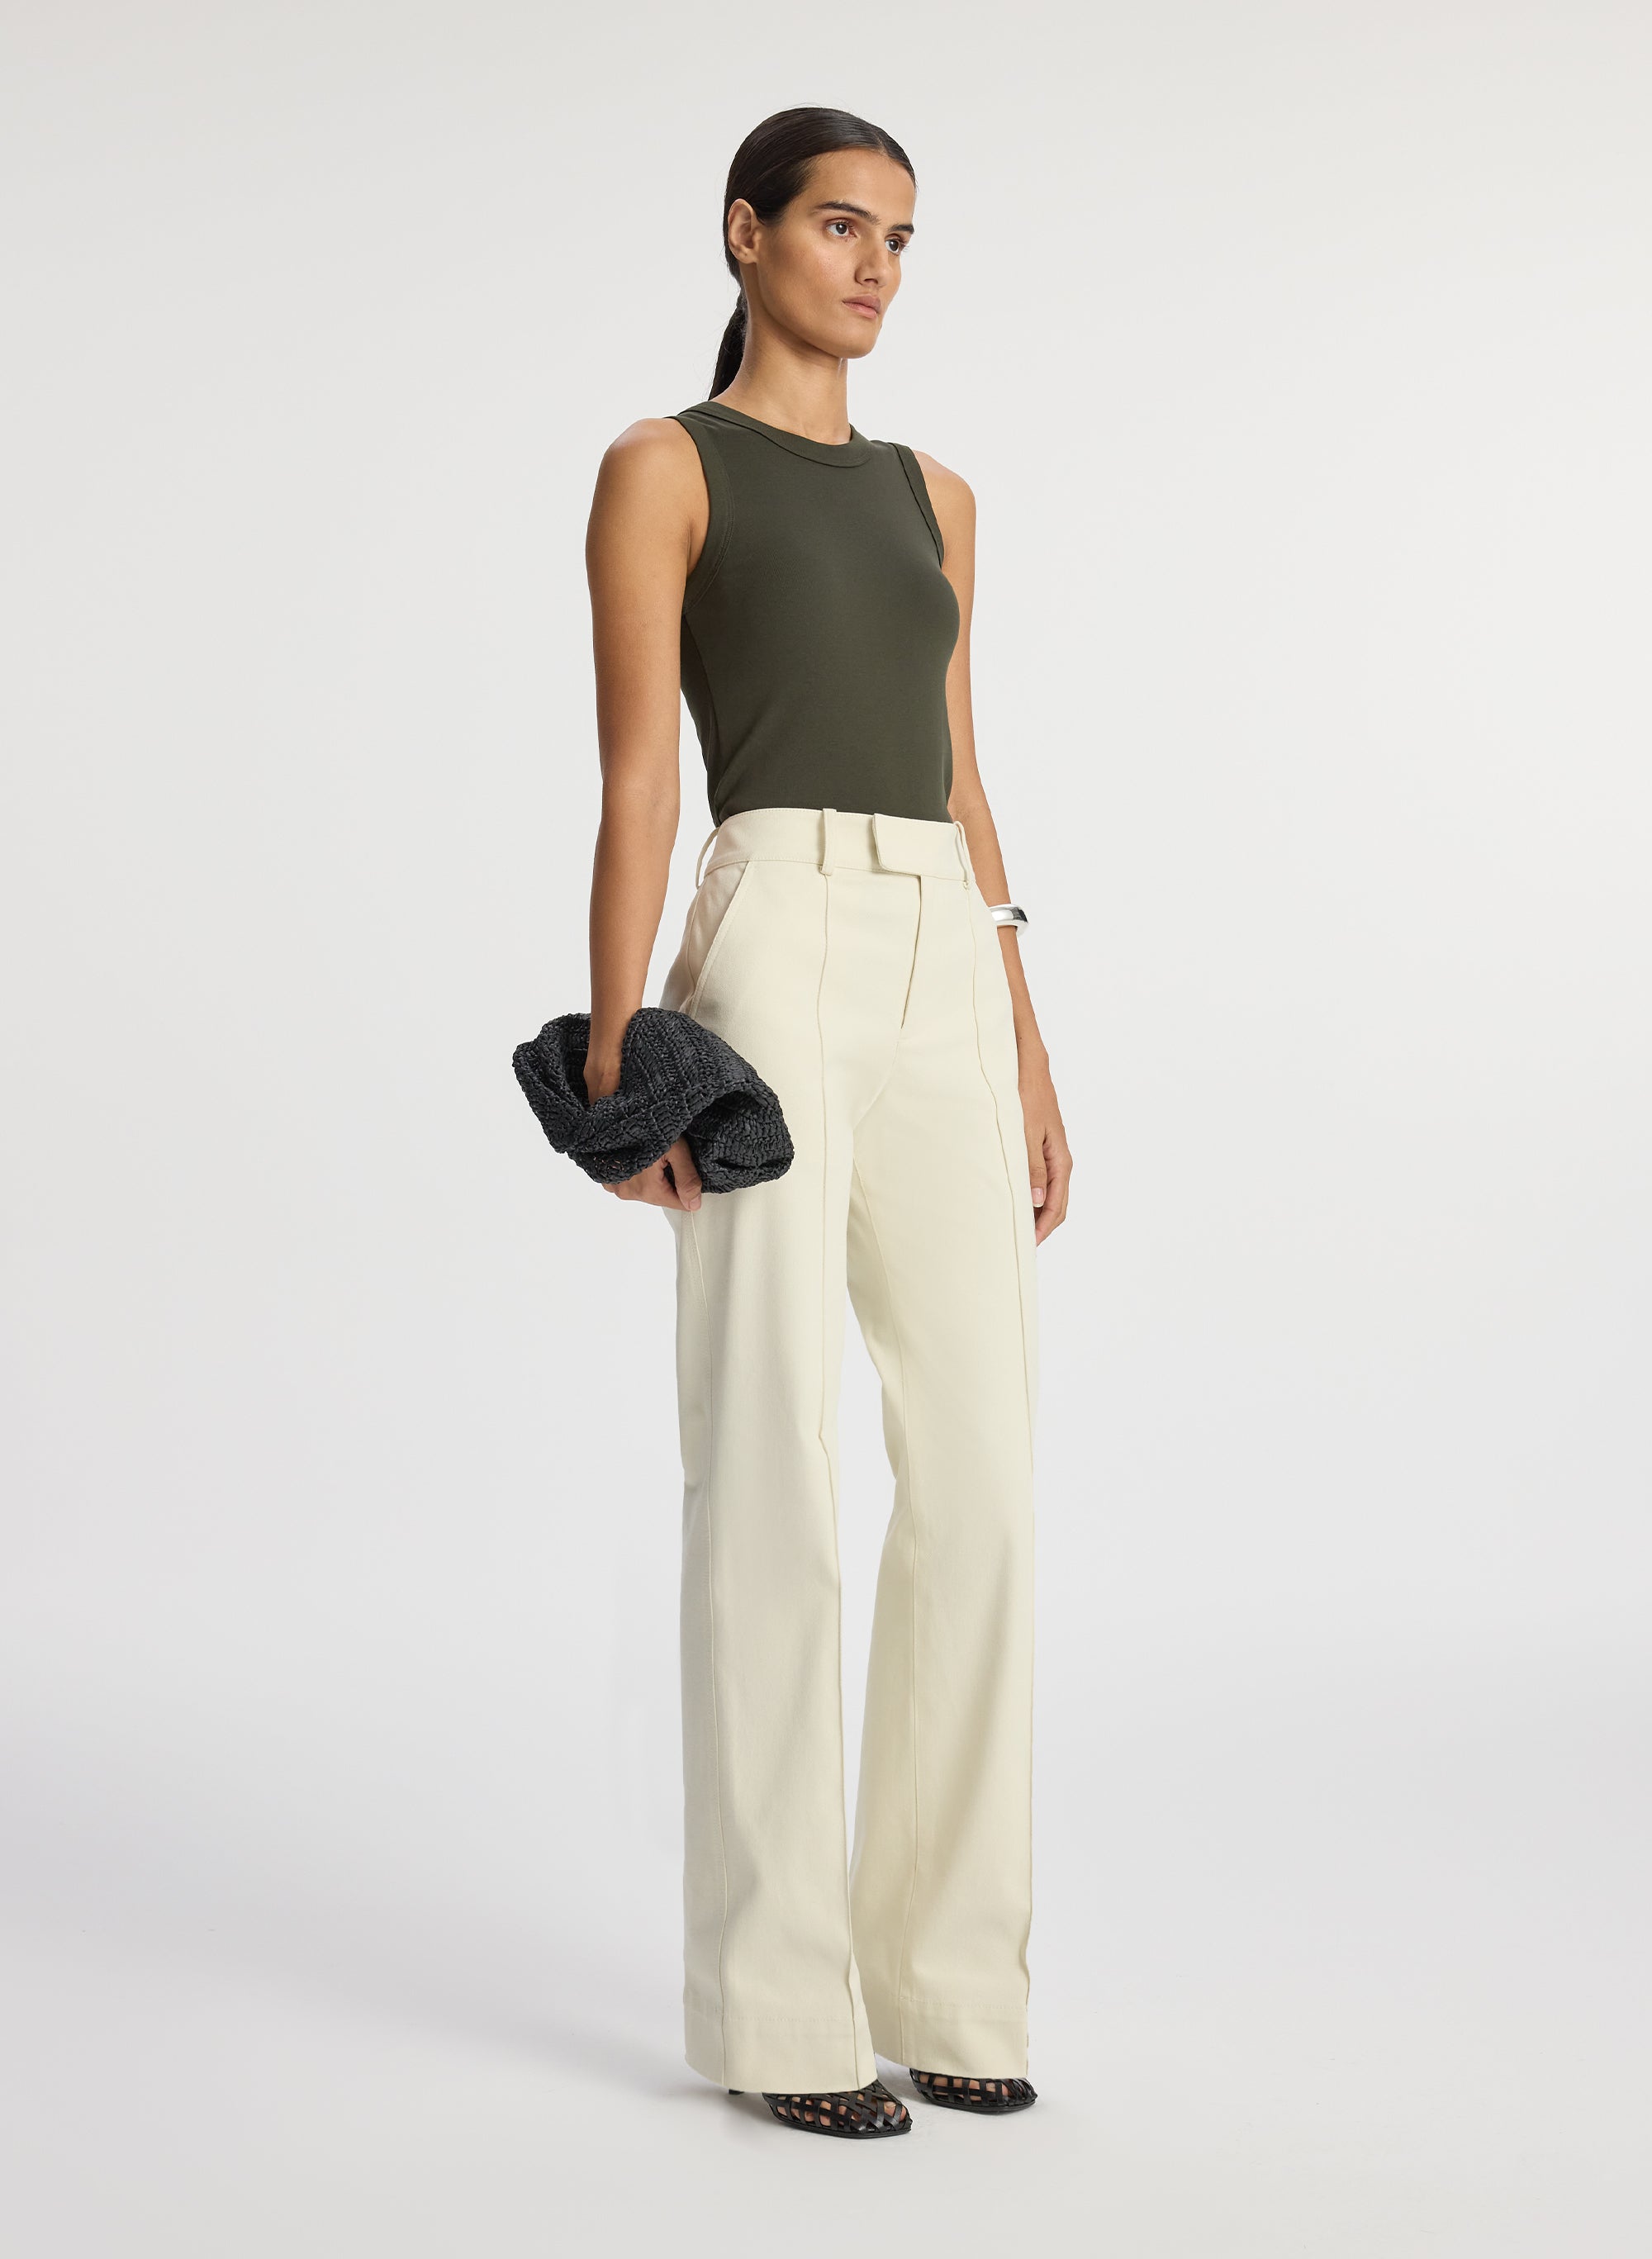 Palazzo Trousers | Women's Wide Leg Trousers | 4th & Reckless